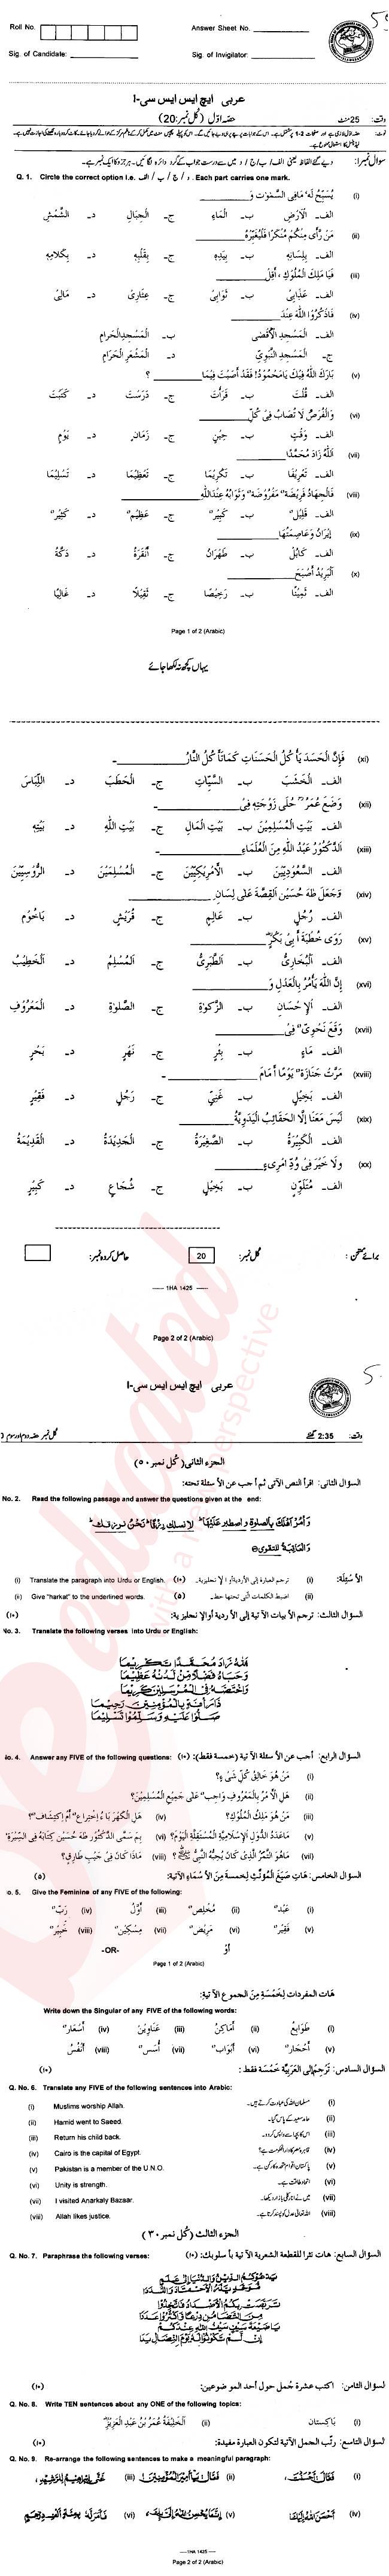 Arabic FA Part 1 Past Paper Group 1 Federal BISE  2014